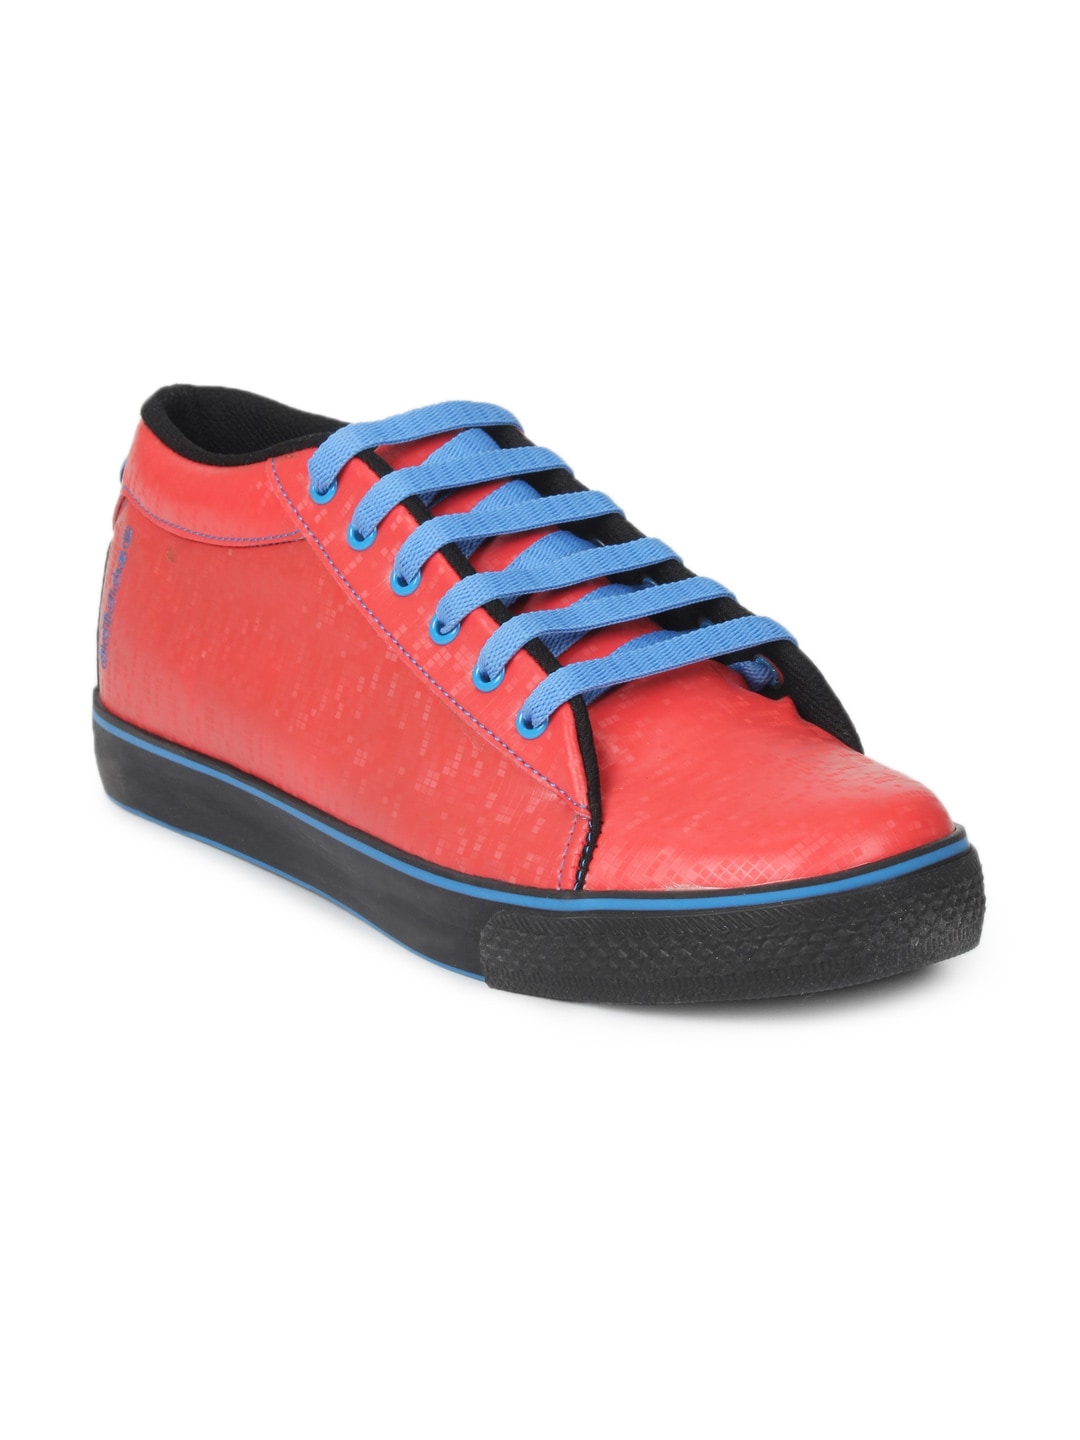 ADIDAS Men Red Shoes